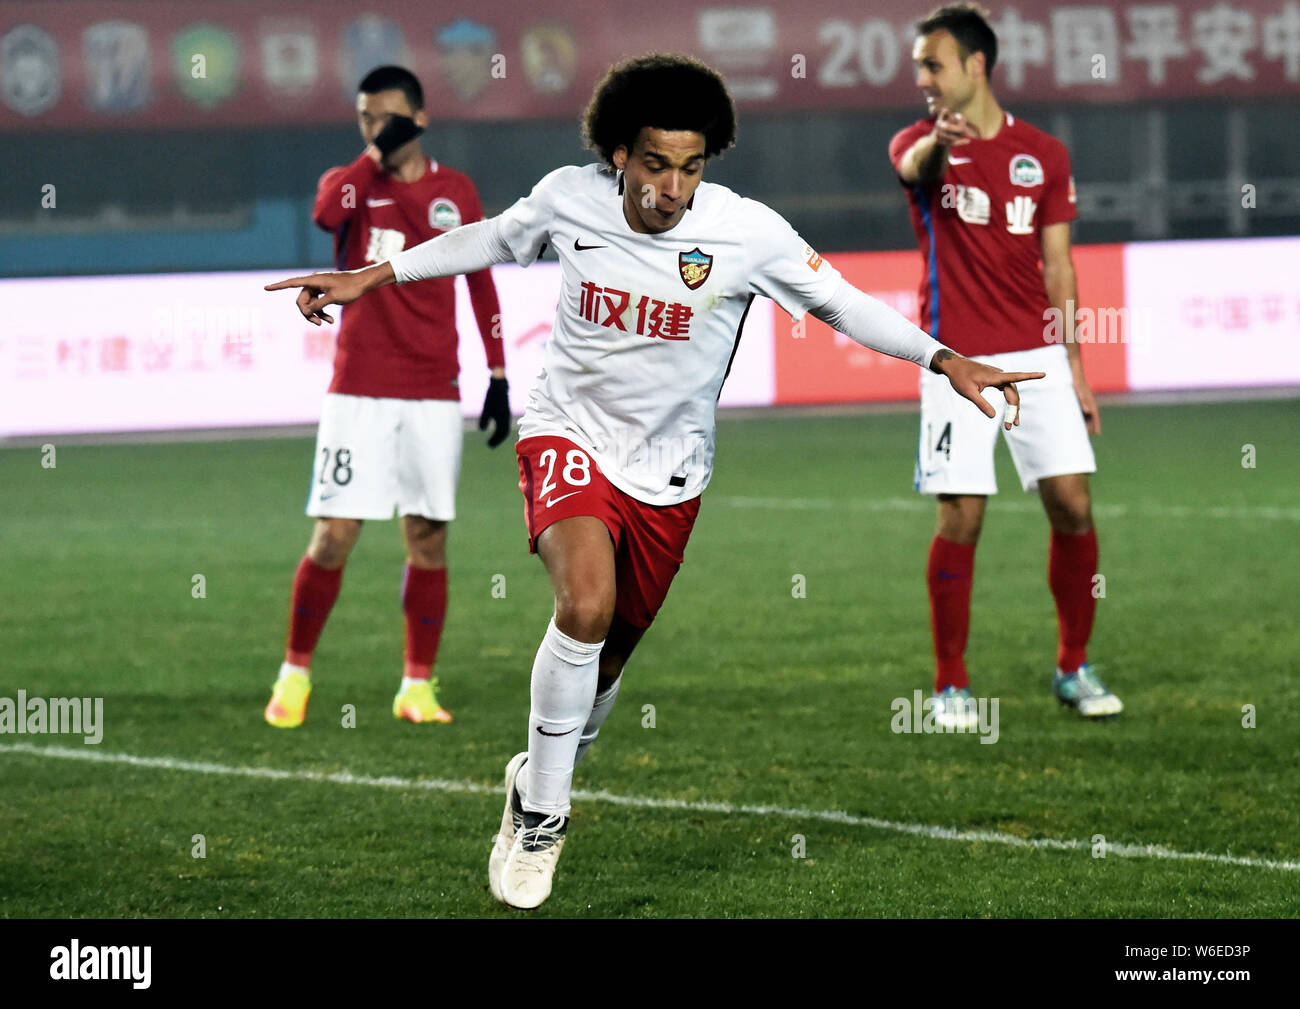 Belgian football player Axel Witsel of Tianjin Quanjian celebrates after scoring a goal against Henan Jianye in their 1st round match during the 2018 Stock Photo